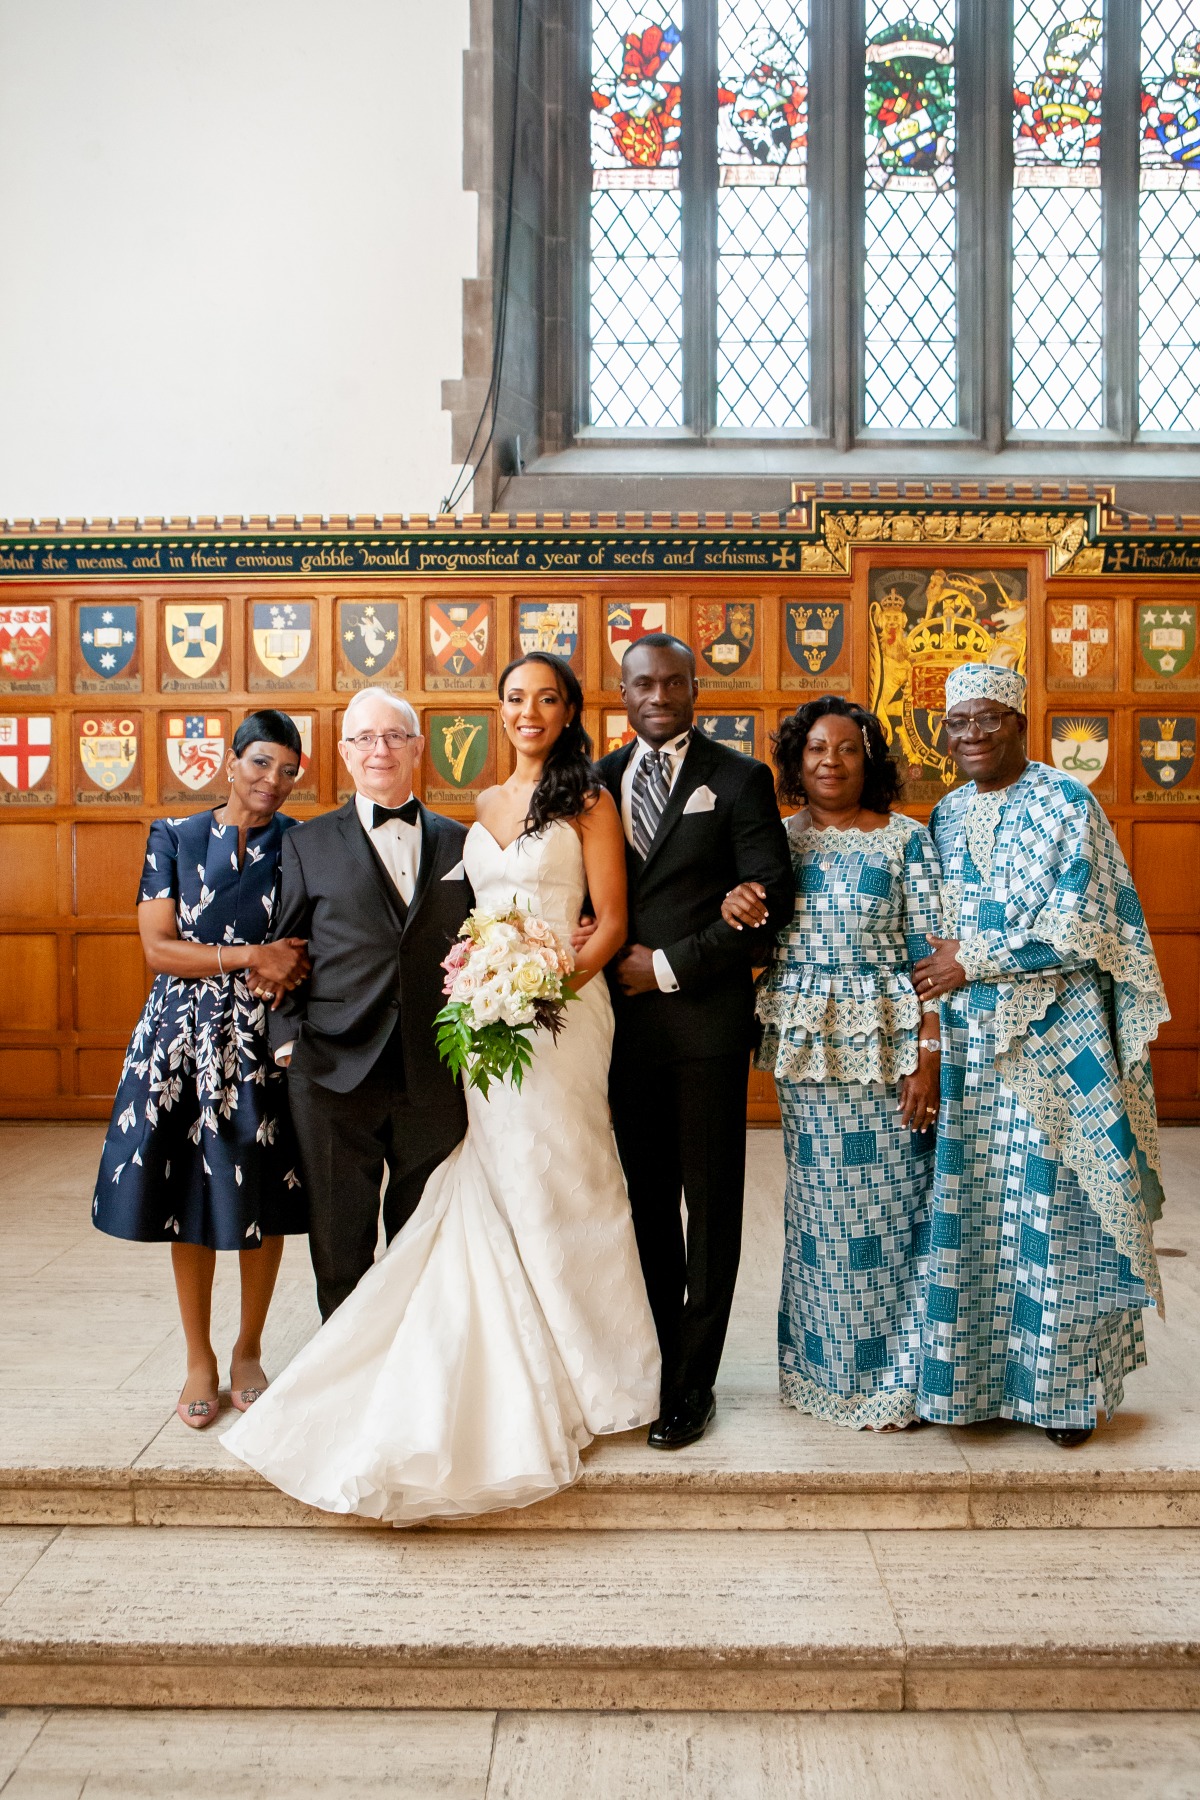 How To Combine Two Distinct Cultures Into One Unforgettable Wedding